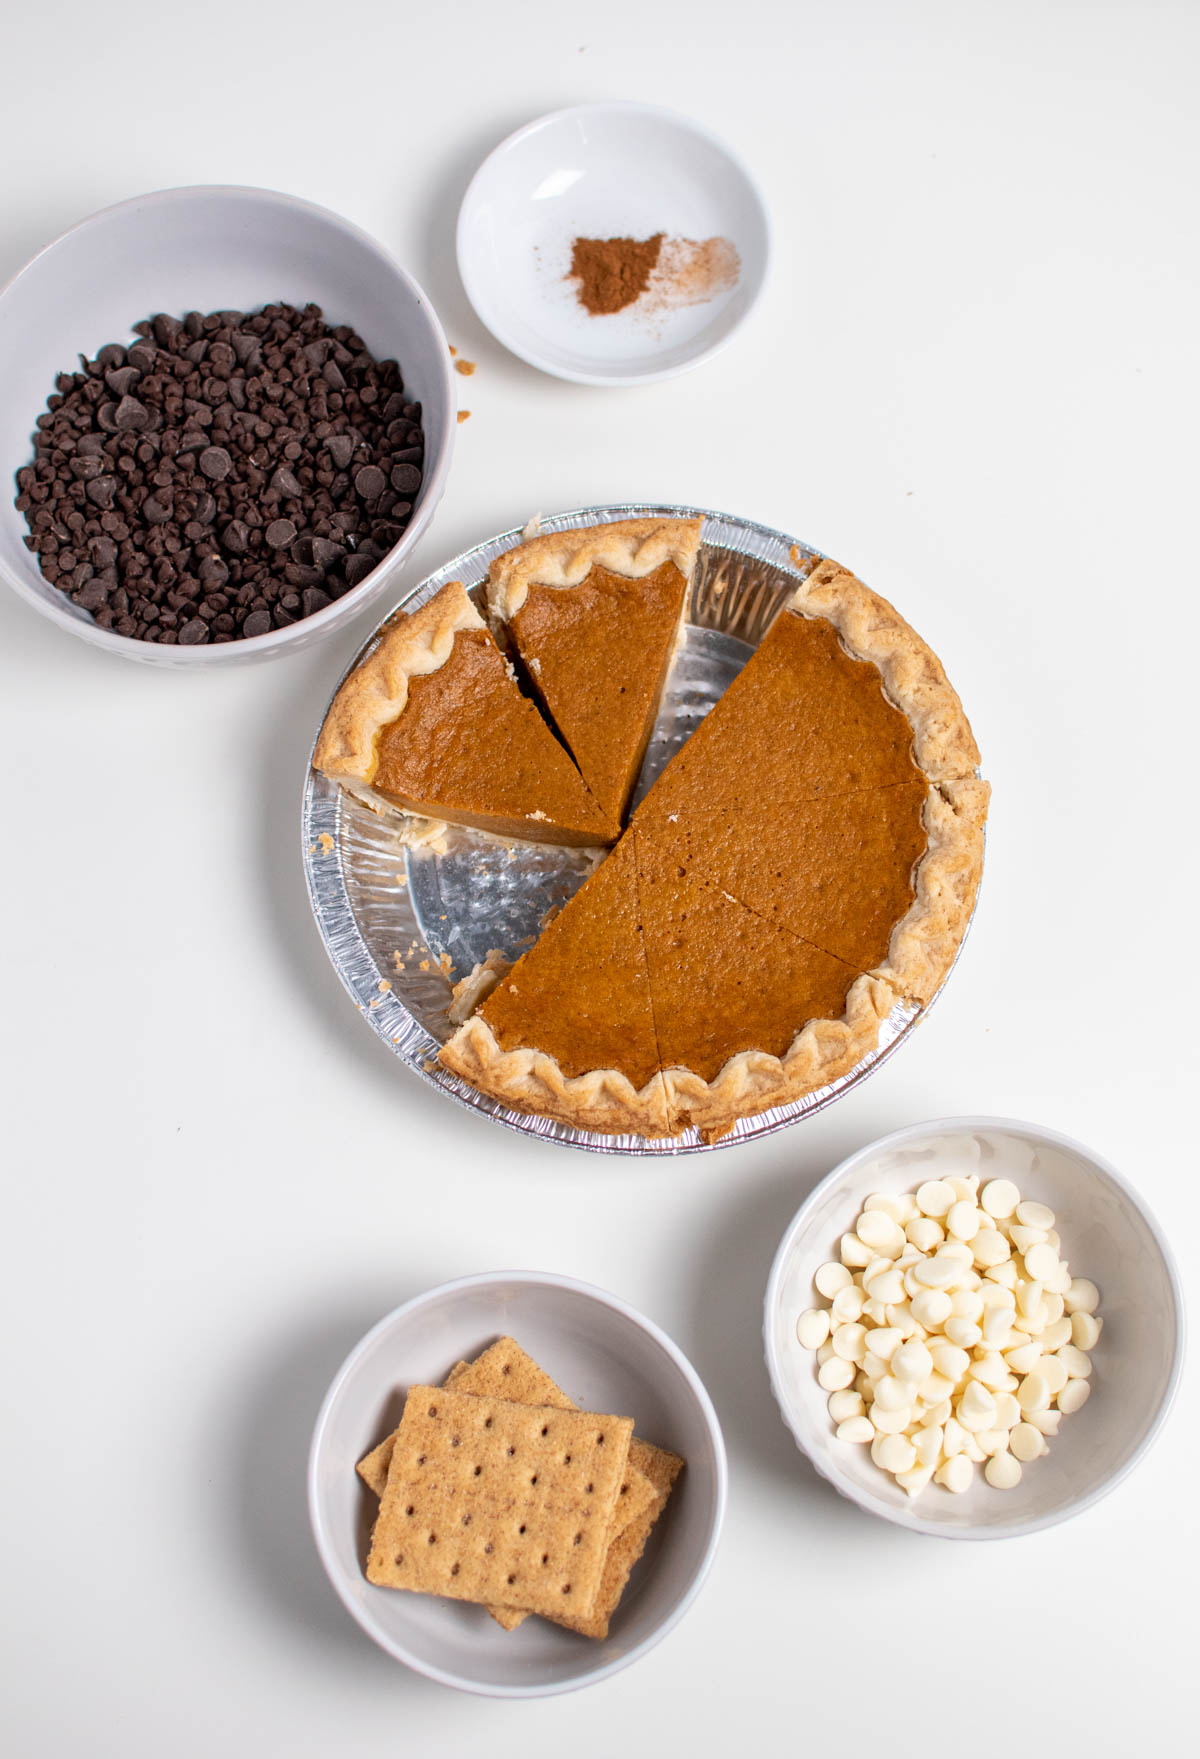 Leftover pumpkin pie truffle ingredients on table including chocolate chips, graham crackers, and pumpkin pie.